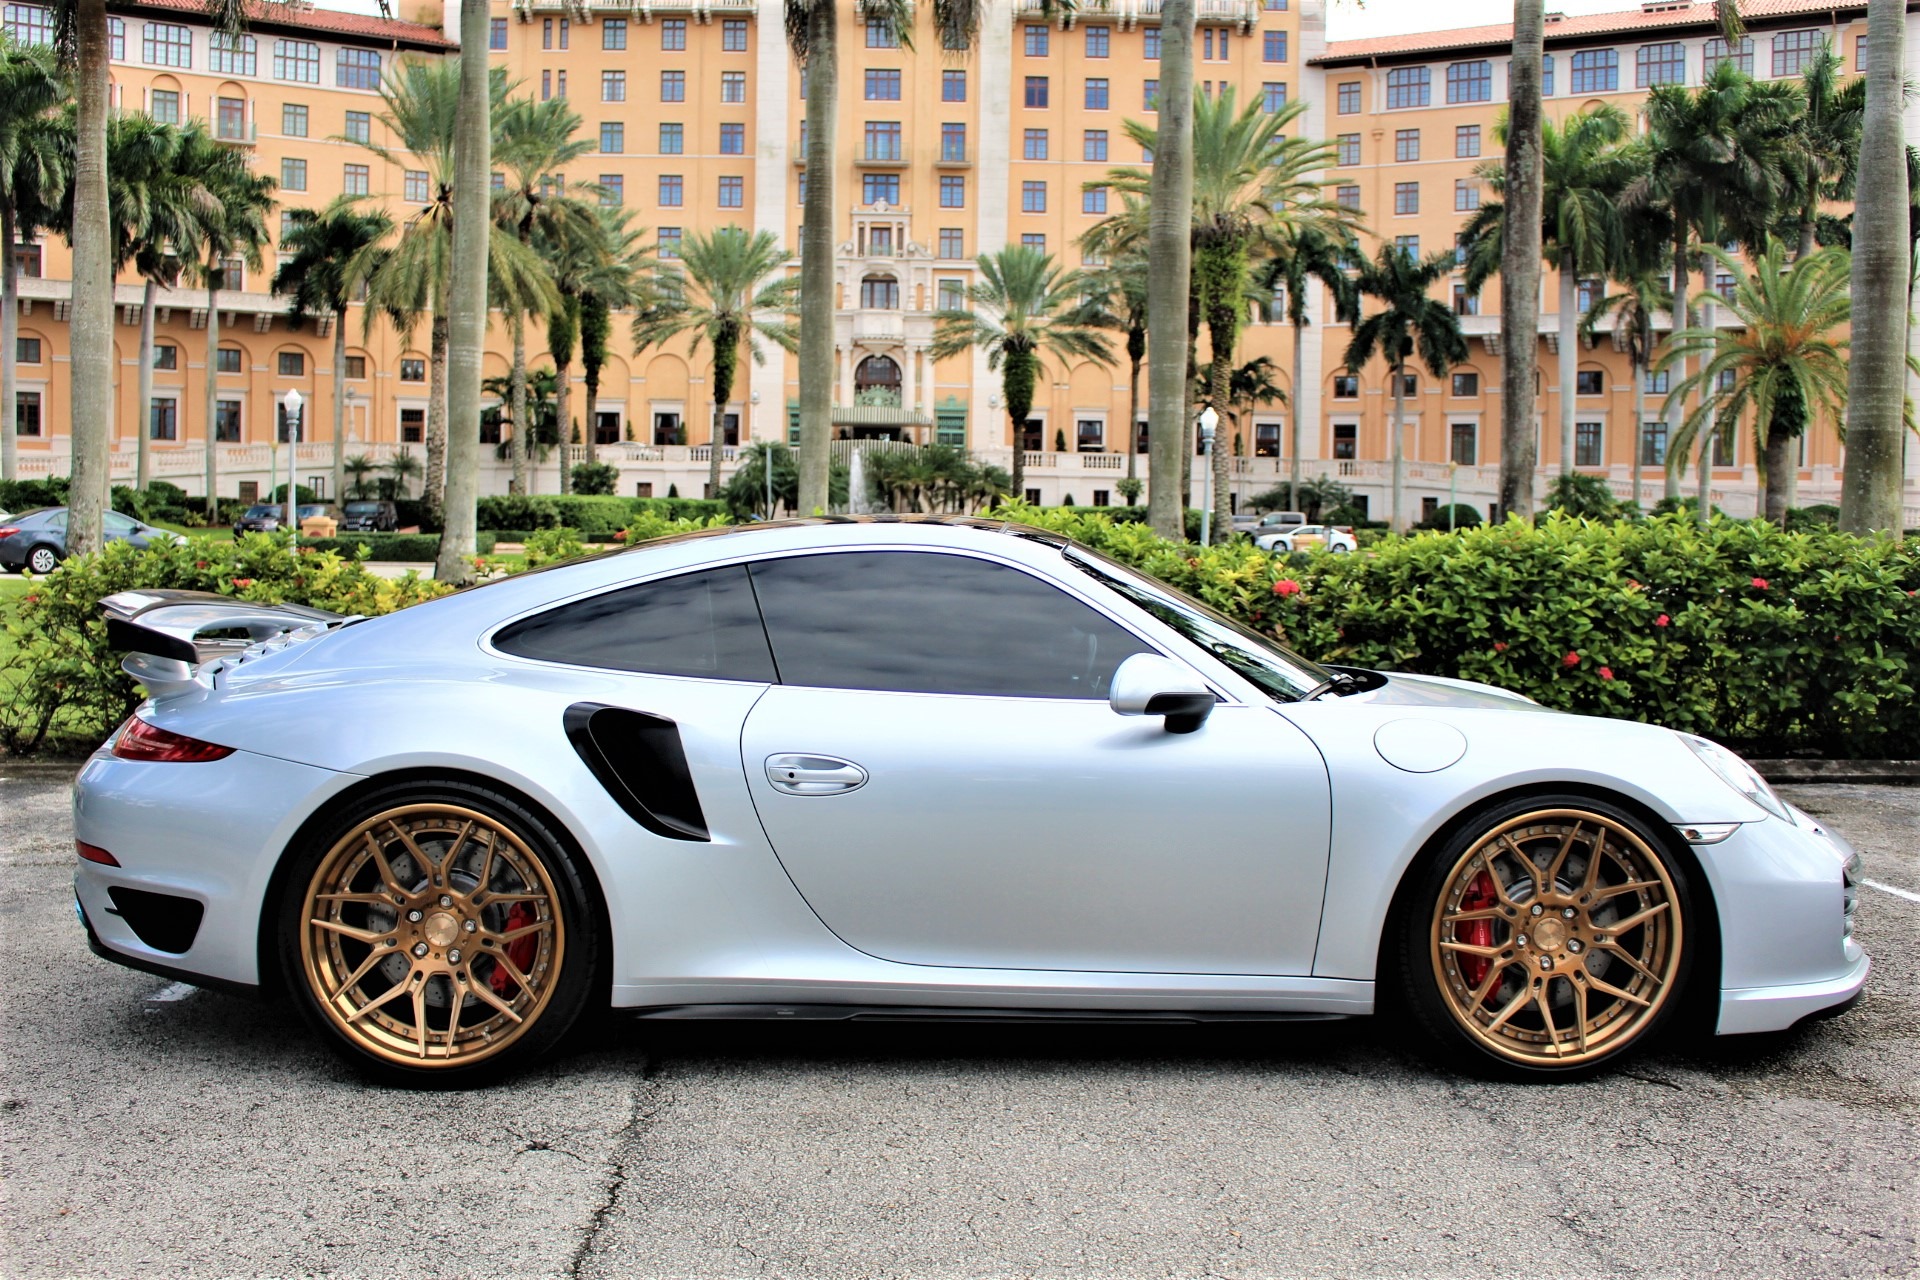 Used 2016 Porsche 911 Turbo for sale Sold at The Gables Sports Cars in Miami FL 33146 1